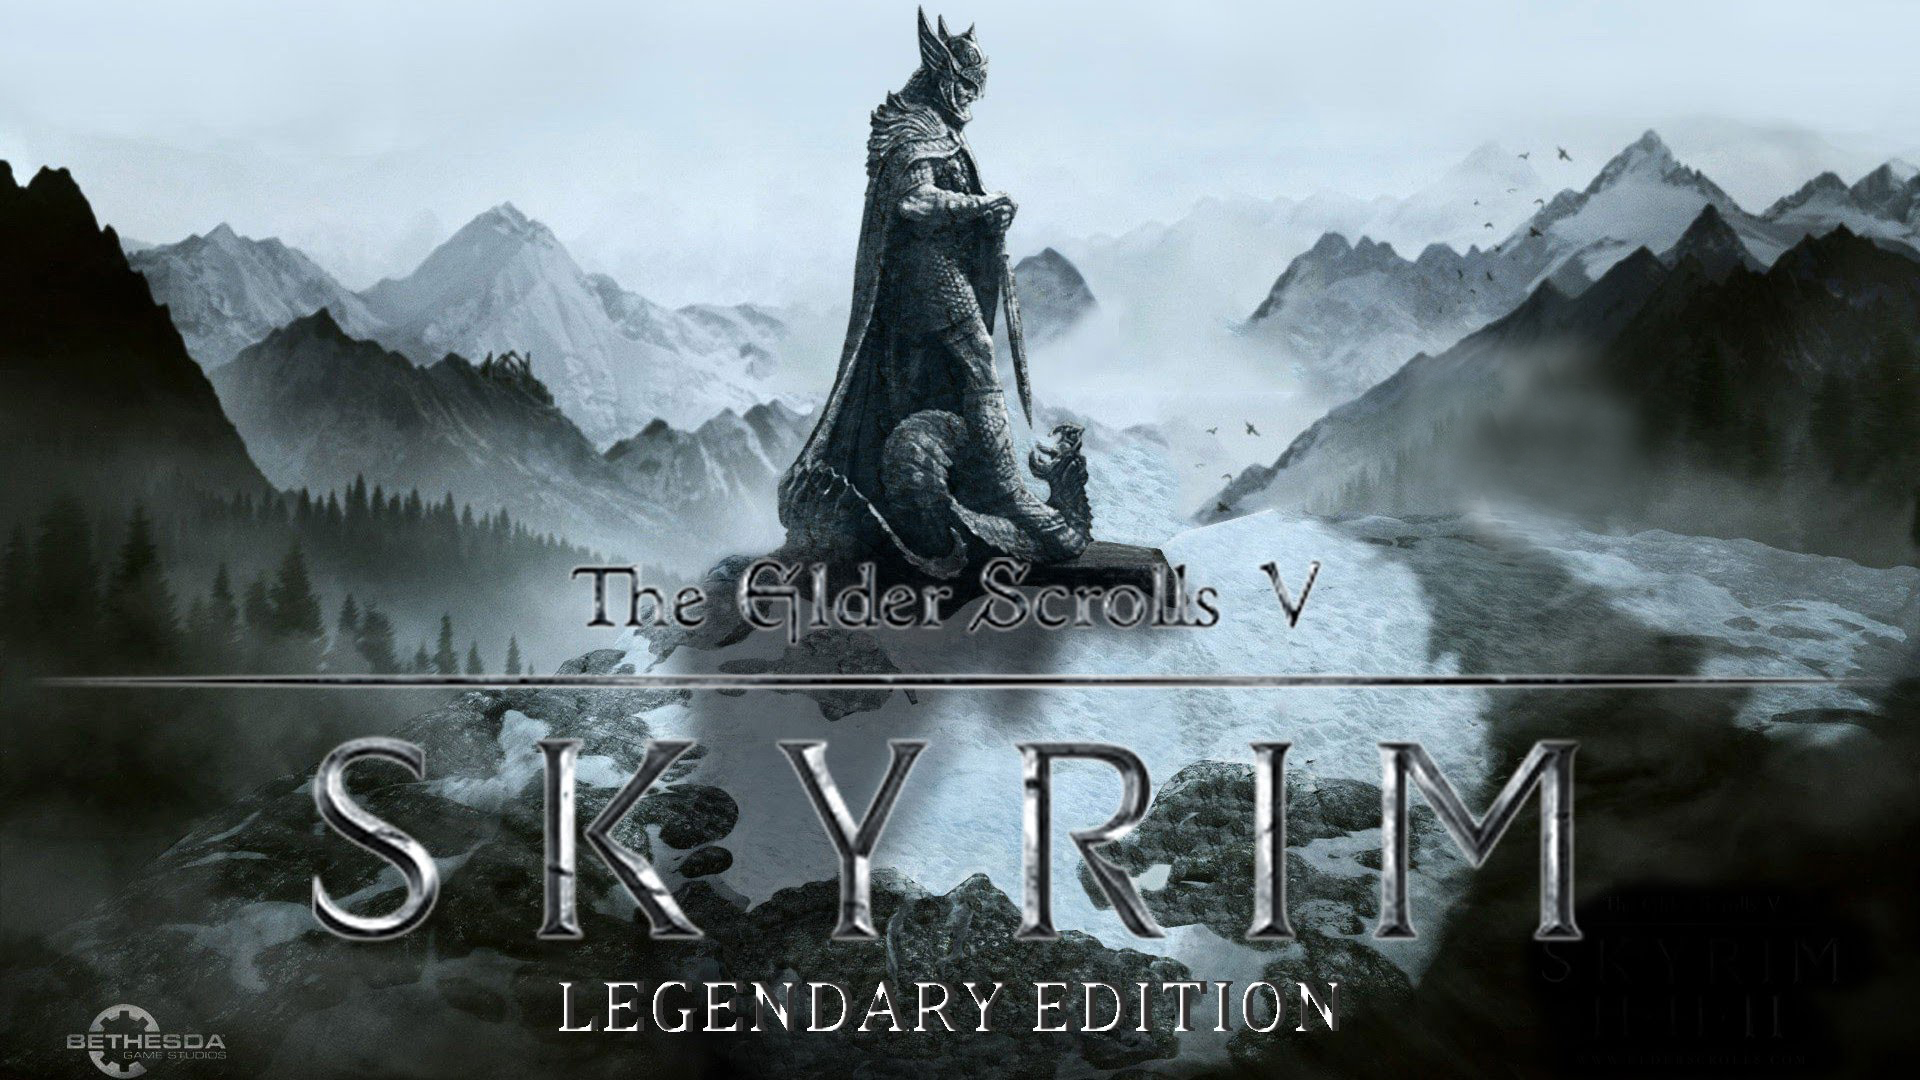 What Is Legendary Edition Skyrim